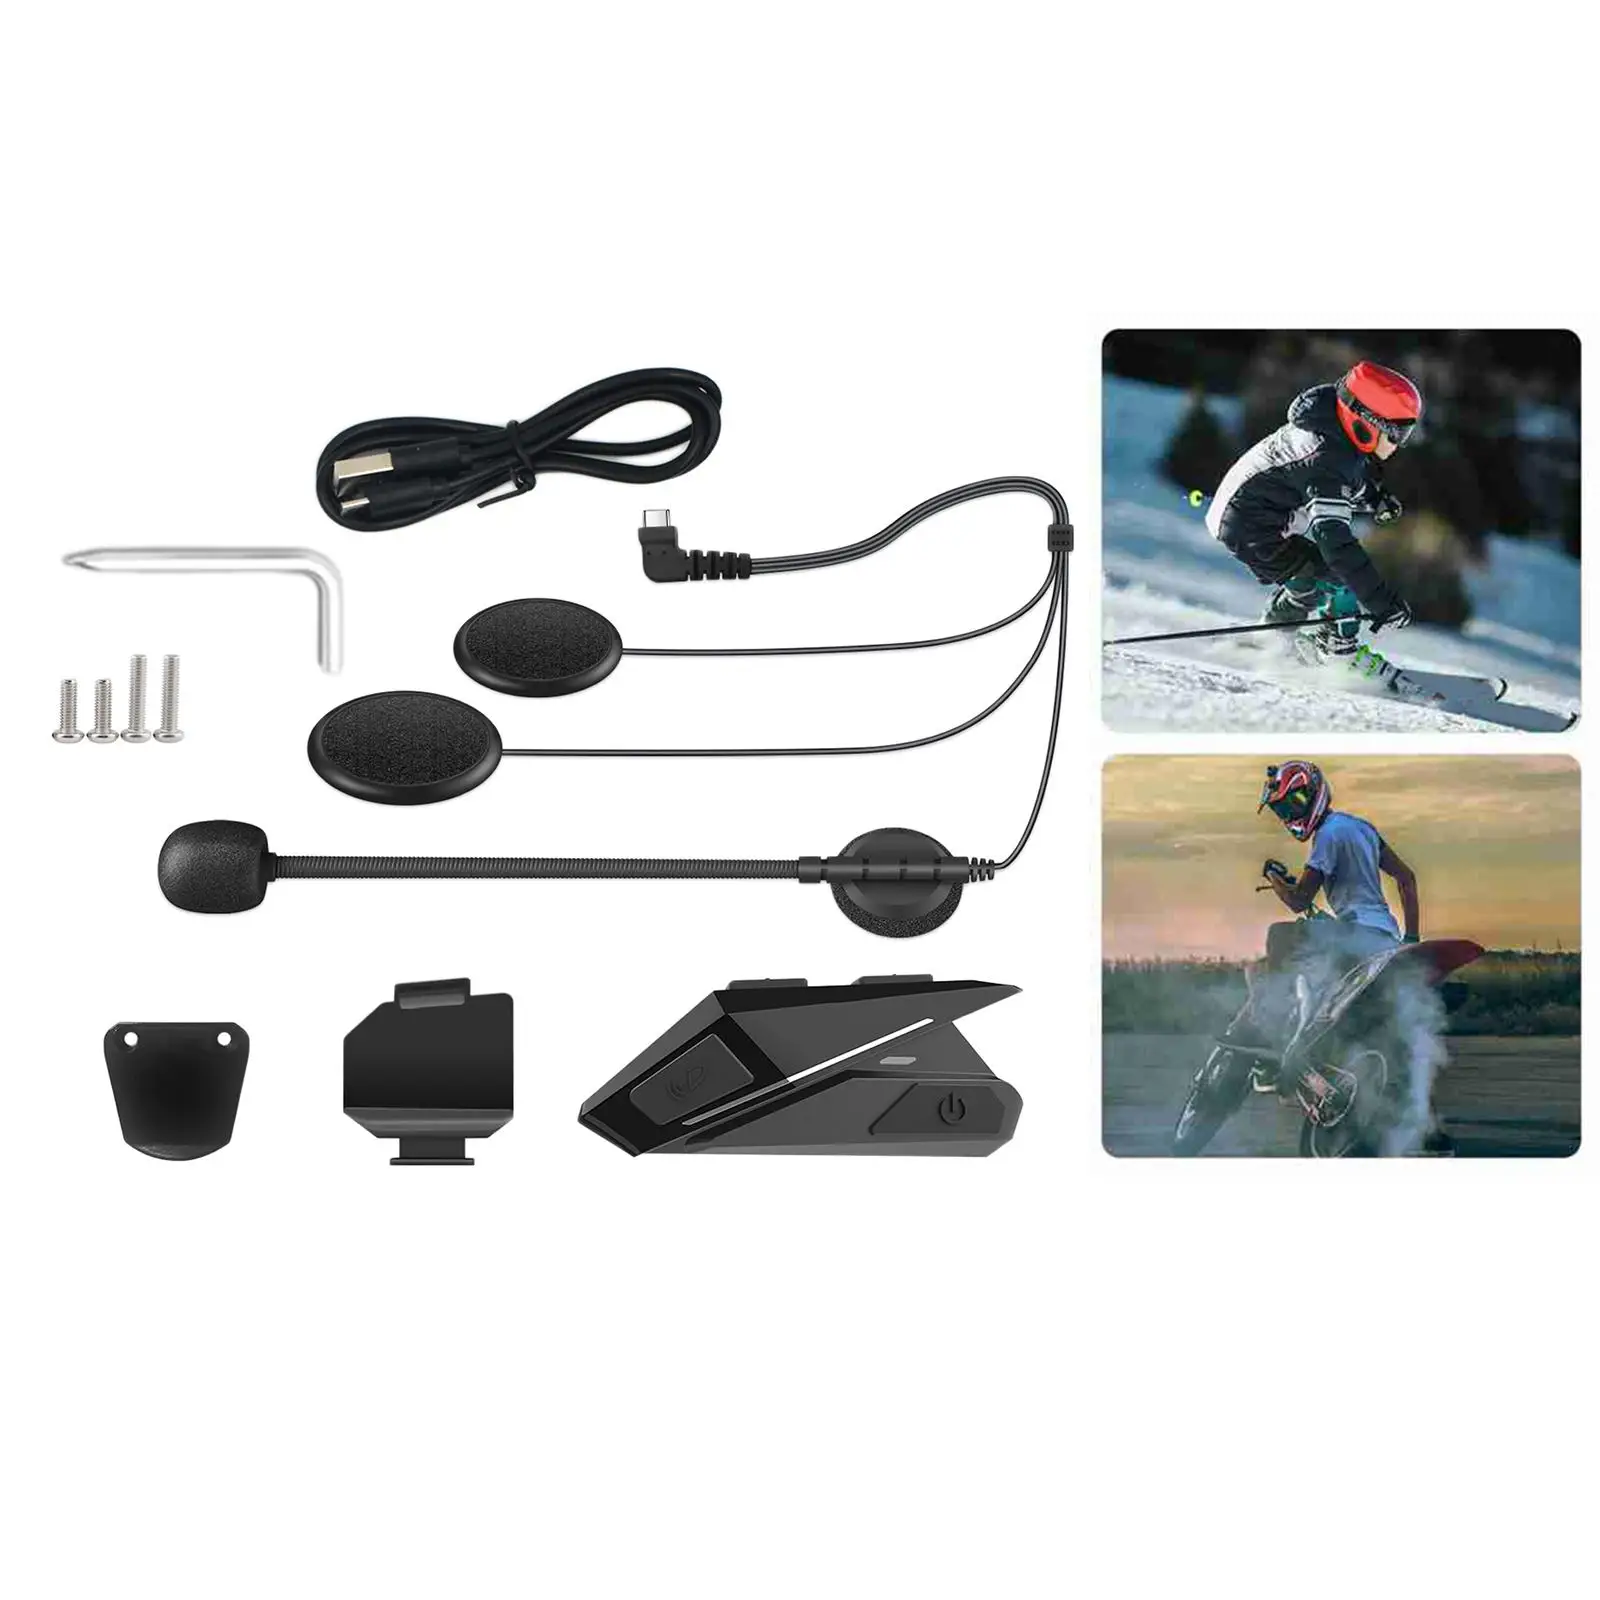 Motorcycle  5.0 Headset Noise-Canceling Stereo with  50mAh Battery Headphone for Driving  Riding